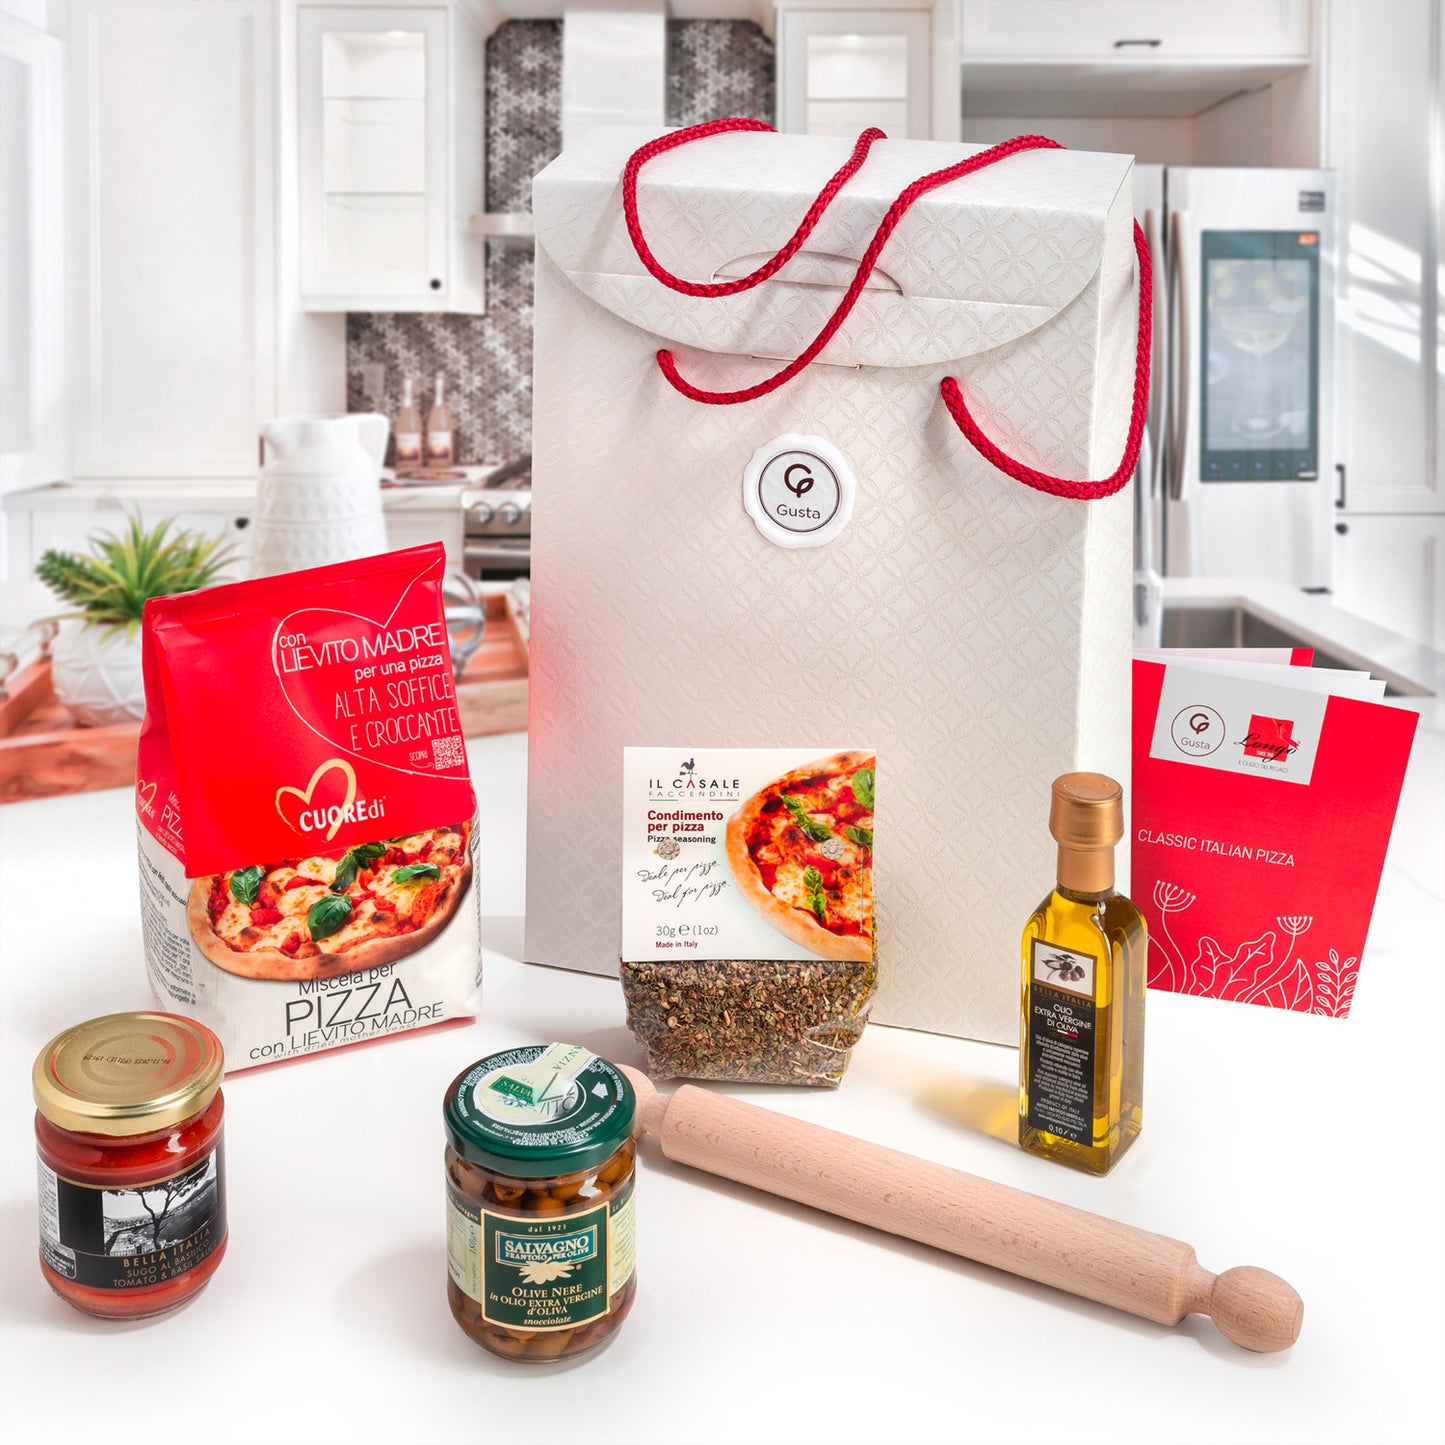 Gusta Gourmet Gift Basket - Premium Italian Products - Made in Italy - Home Pizza Kit